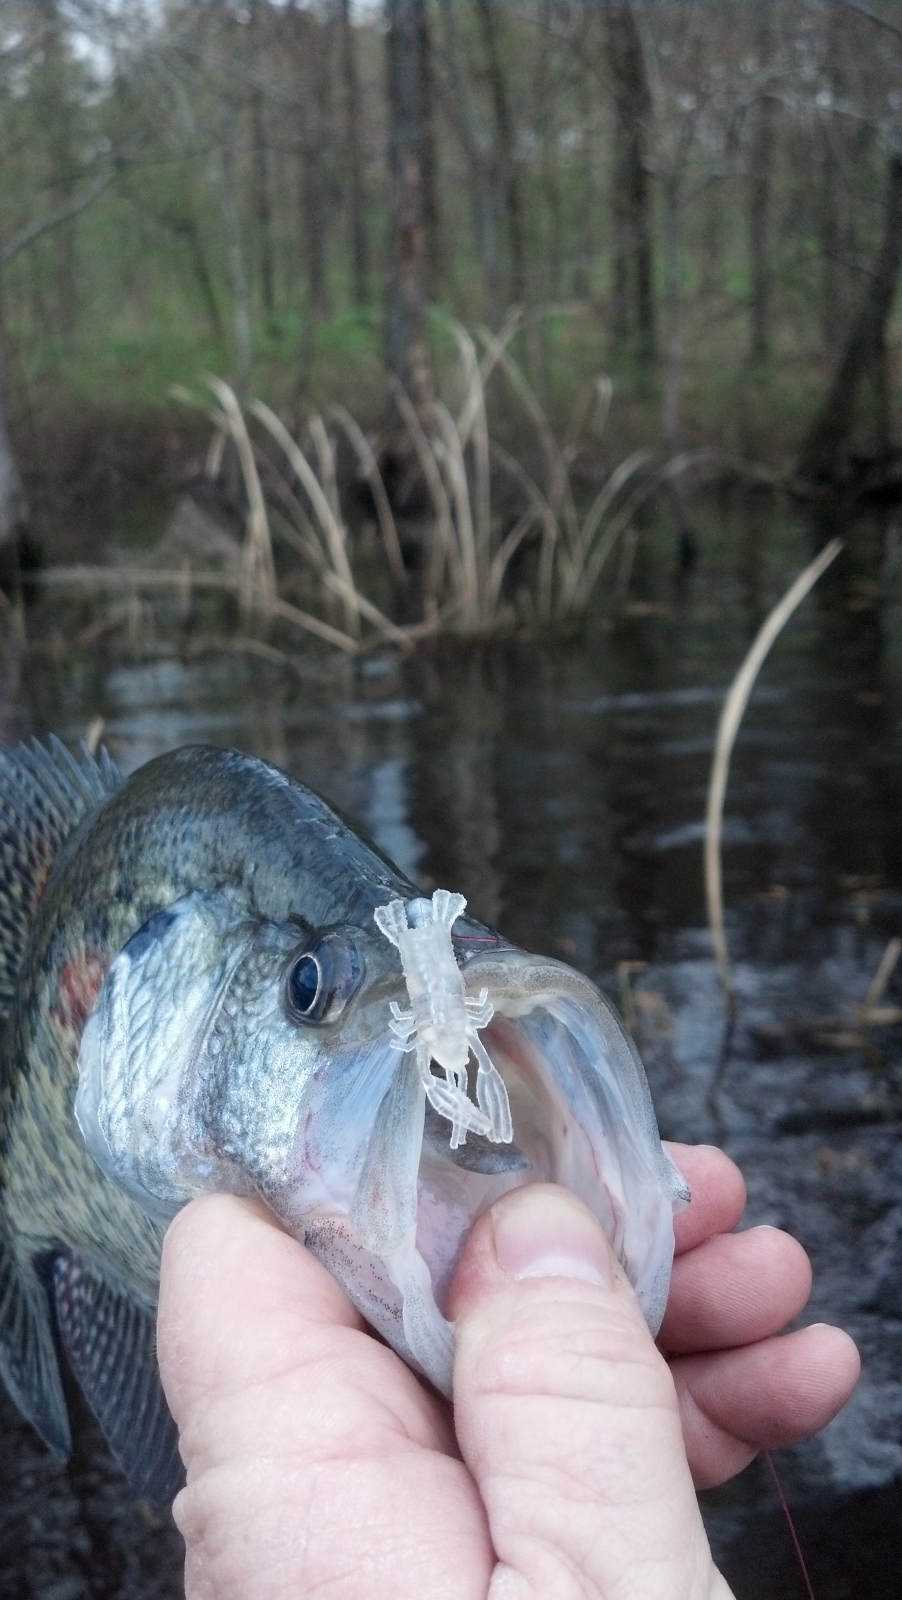 Crappie Caught by John with Mister Twister 1¼ Micro Crawfish™ in